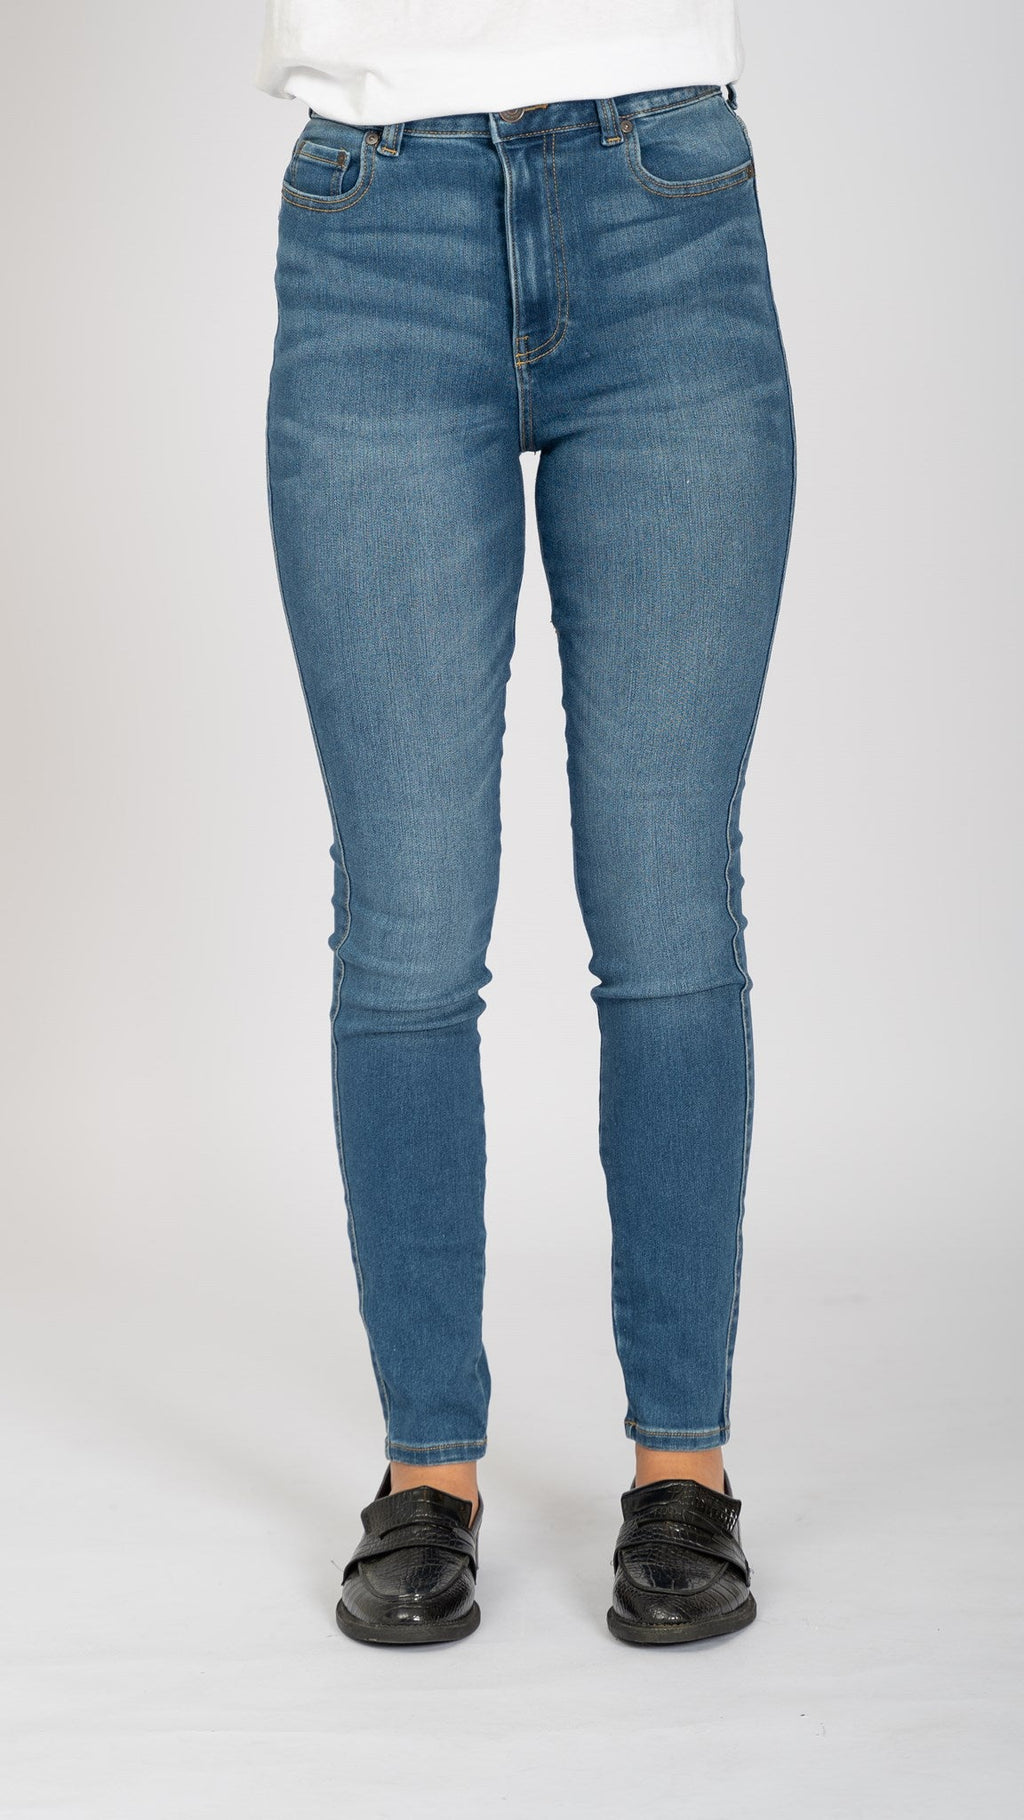 The Original Performance Skinny Jeans ™ ️ Mujeres - Paquete (2 PC).